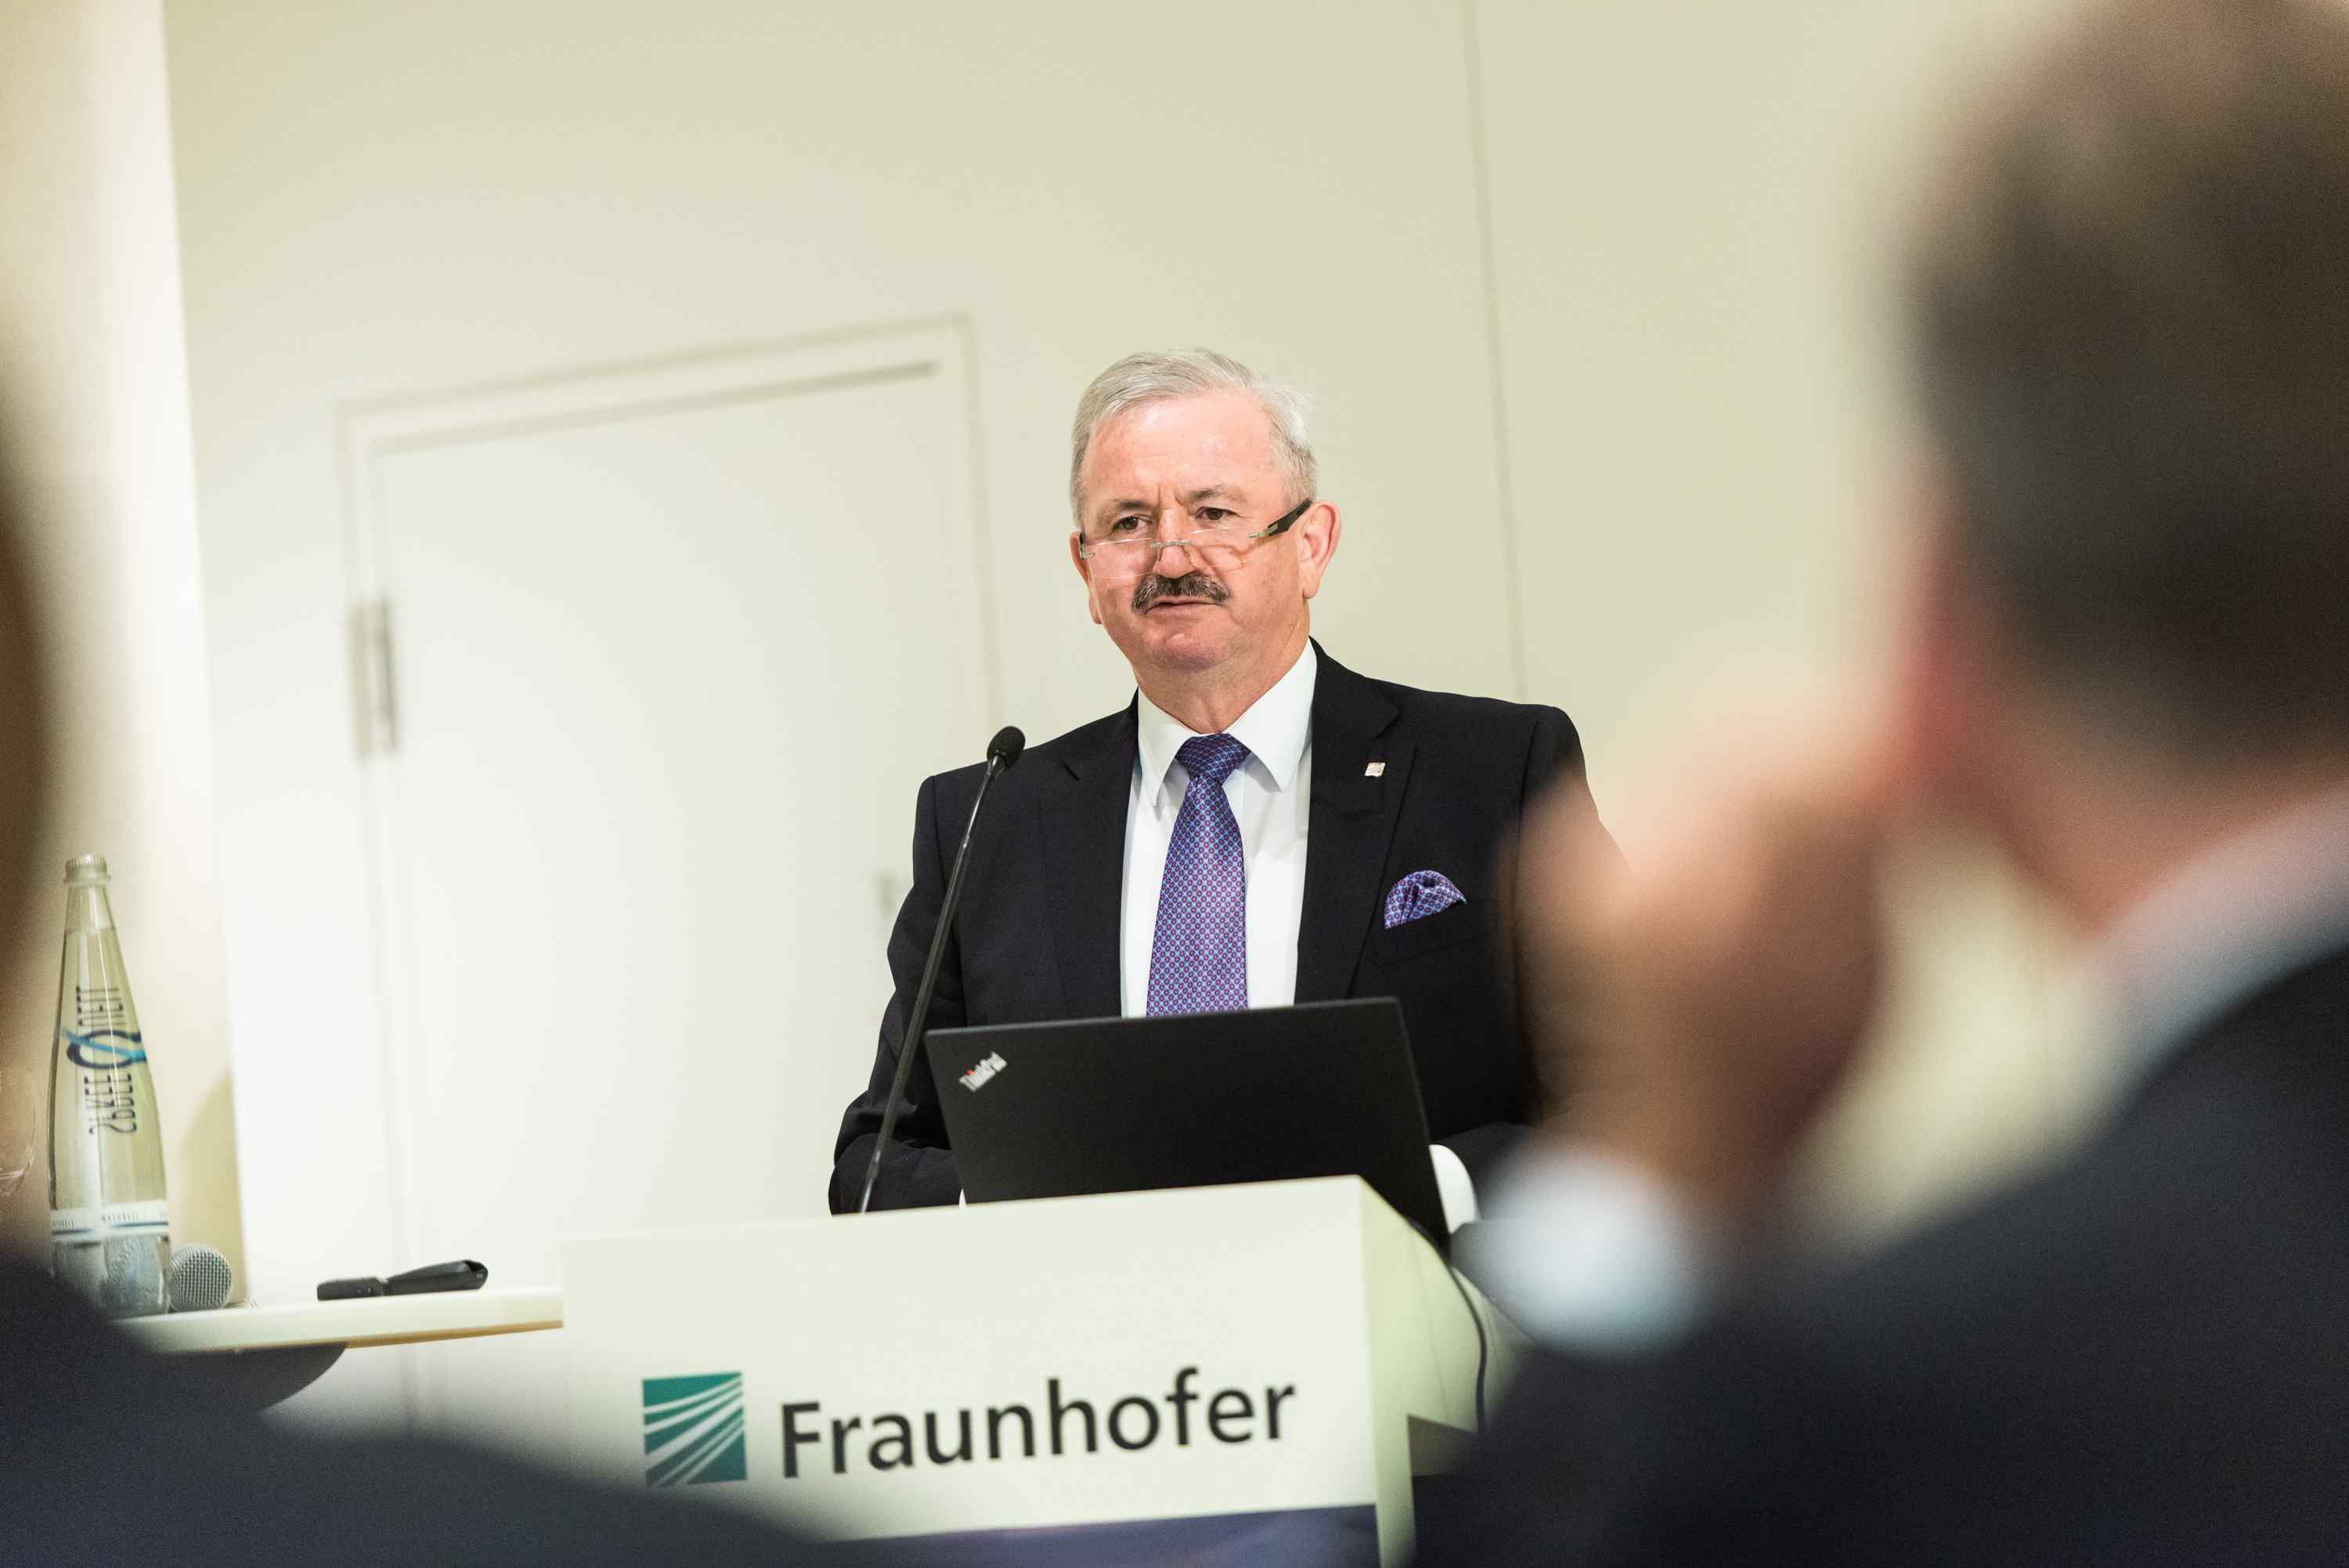 Speech at the kick-off of the Fraunhofer lead project QMag.